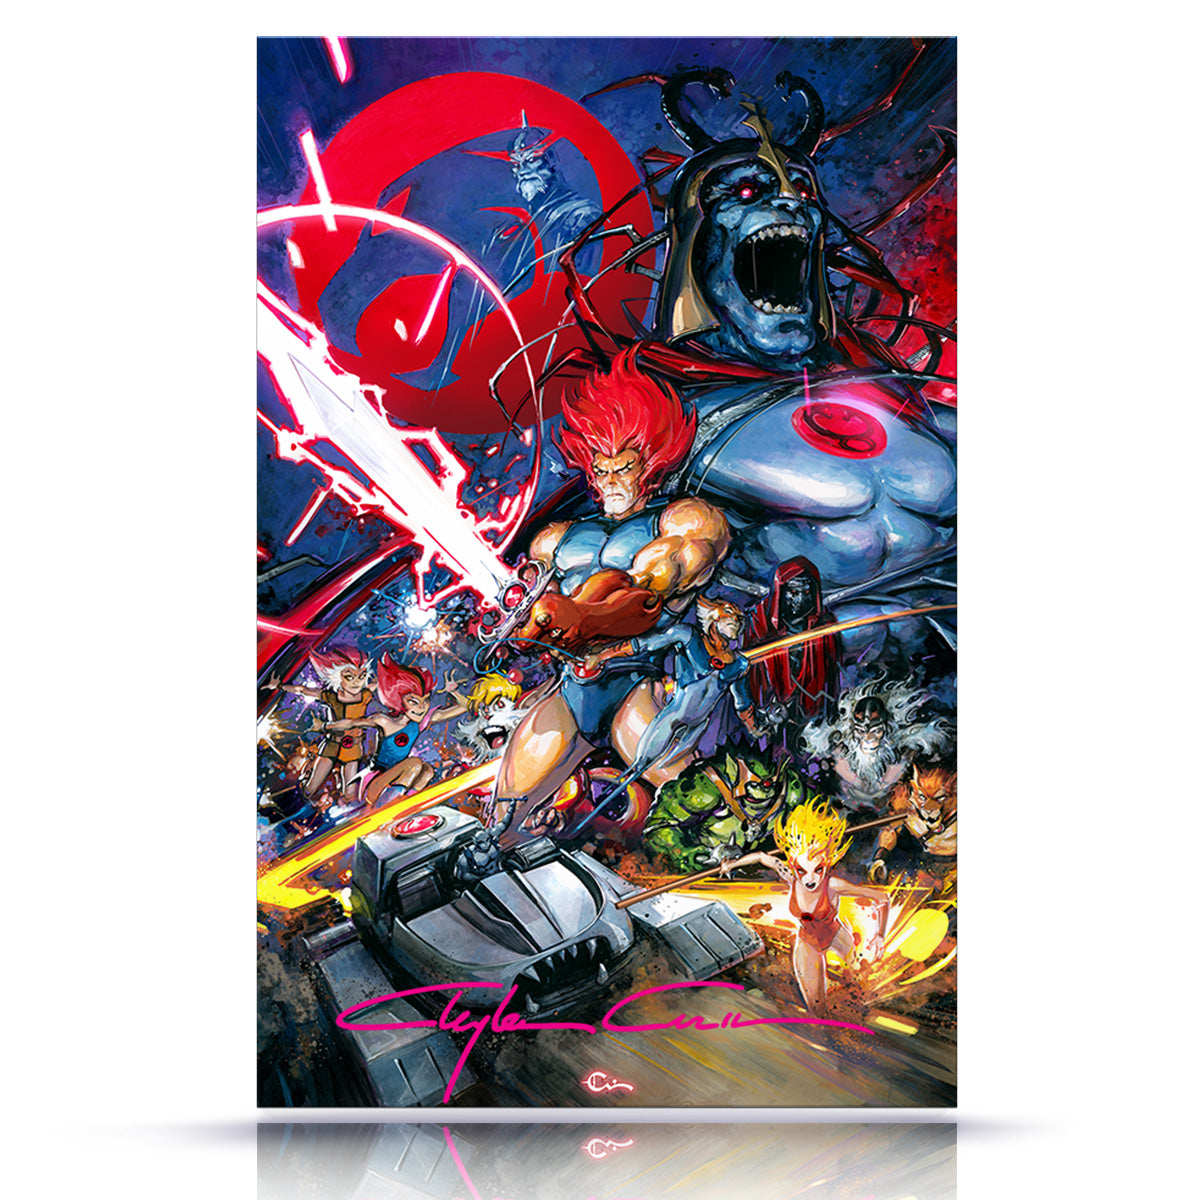 PreOrder: Classic Signature Thundercats #1 Virgin Variant Limited to 3 ...